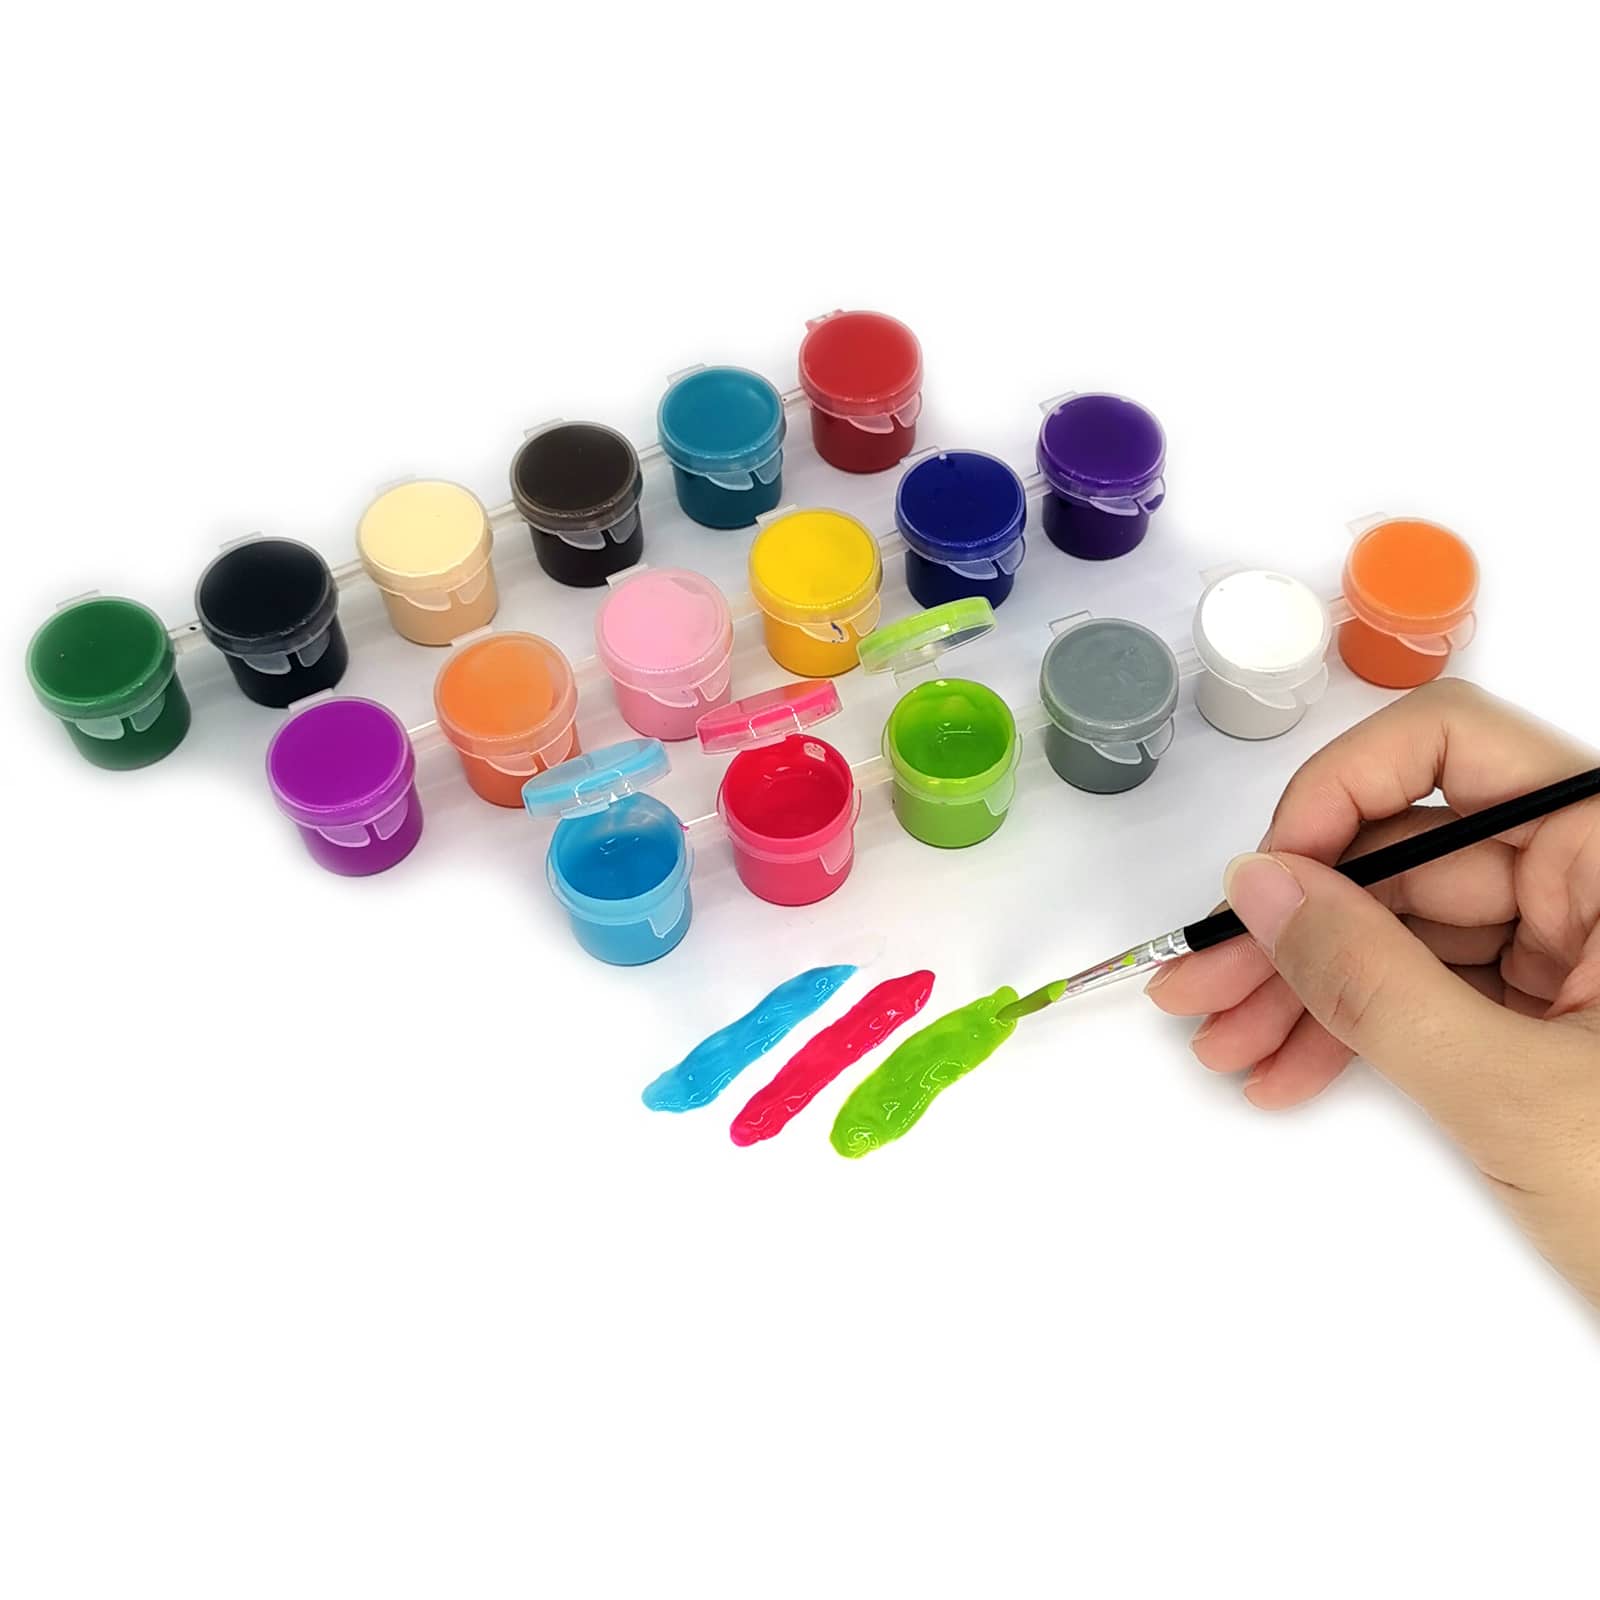 12 Packs: 18 ct. (216 total) Washable Paint Pots by Creatology™